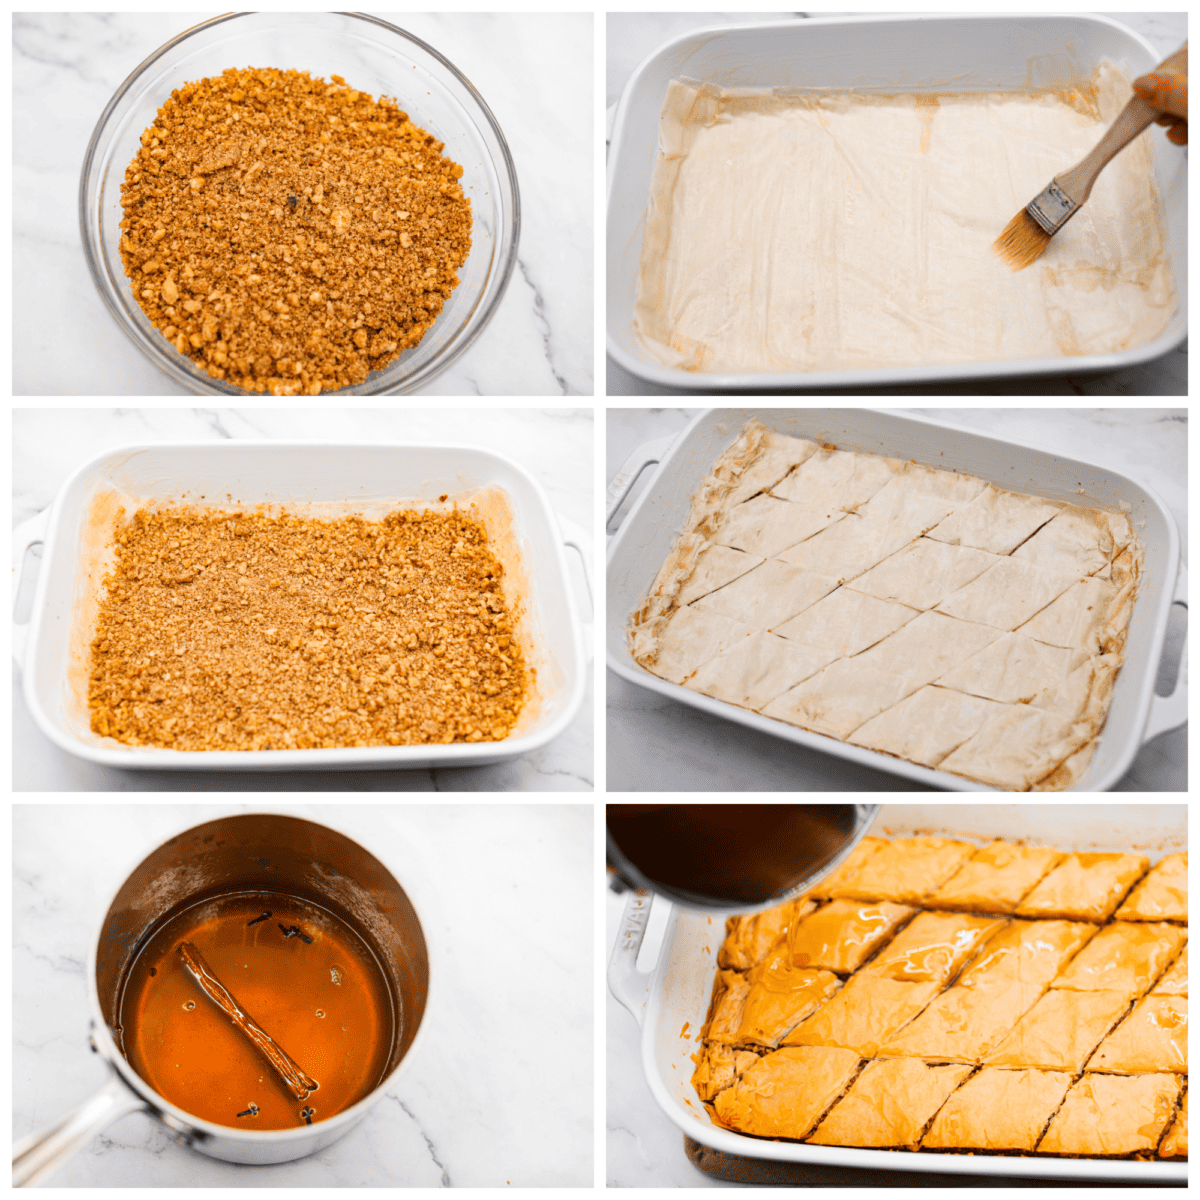 6-photo collage of the phyllo pastry and nut mixture being layered, then coated in honey syrup.